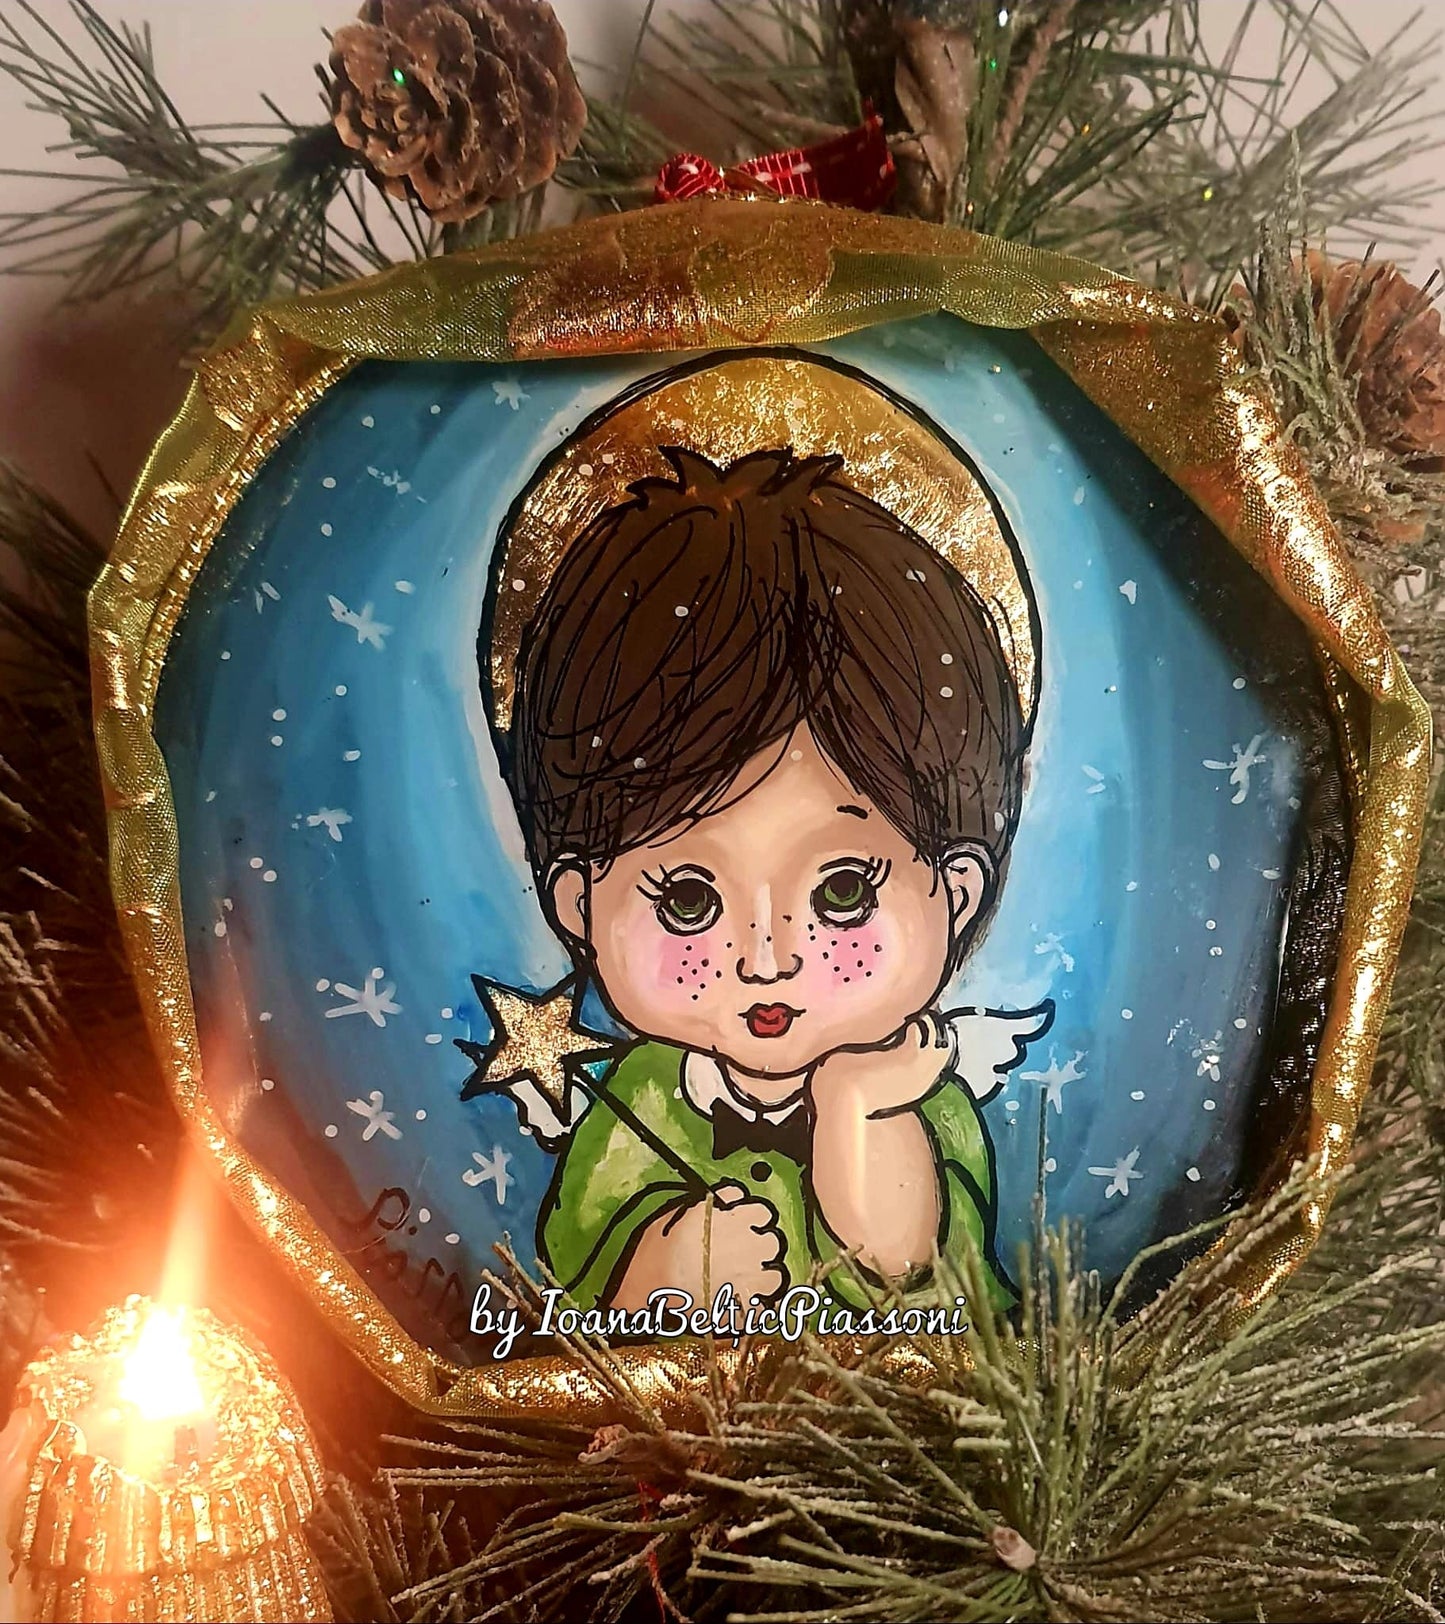 Star Prince of the Holidays:A Festive Painting in Glass